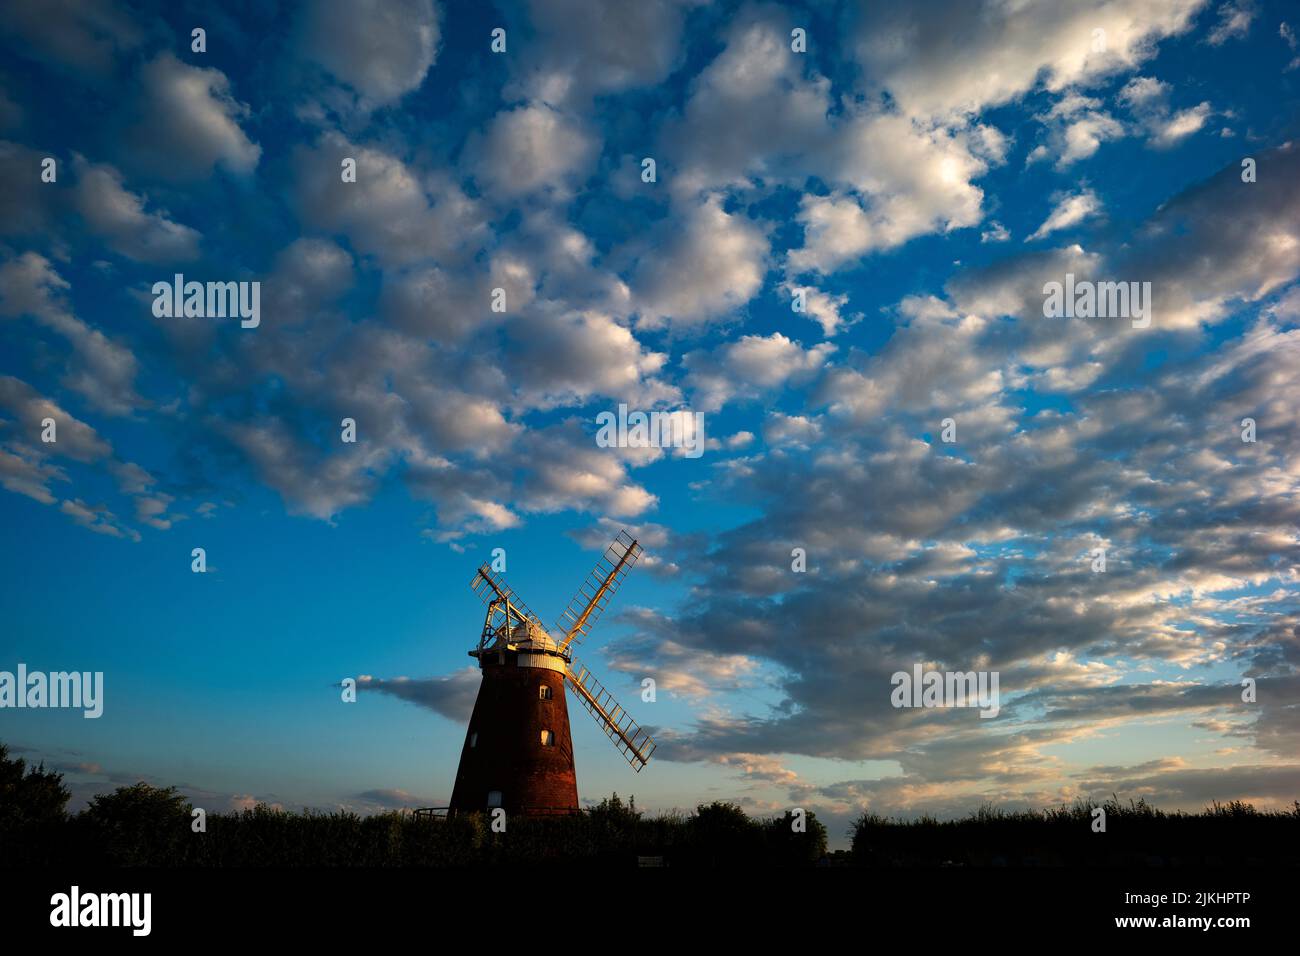 Thaxted Essex England Thaxted Windmill July 2022 John Webb’s Windmill also known as Thaxted Windmill in late evening sunlight against a mackerel sky. Stock Photo